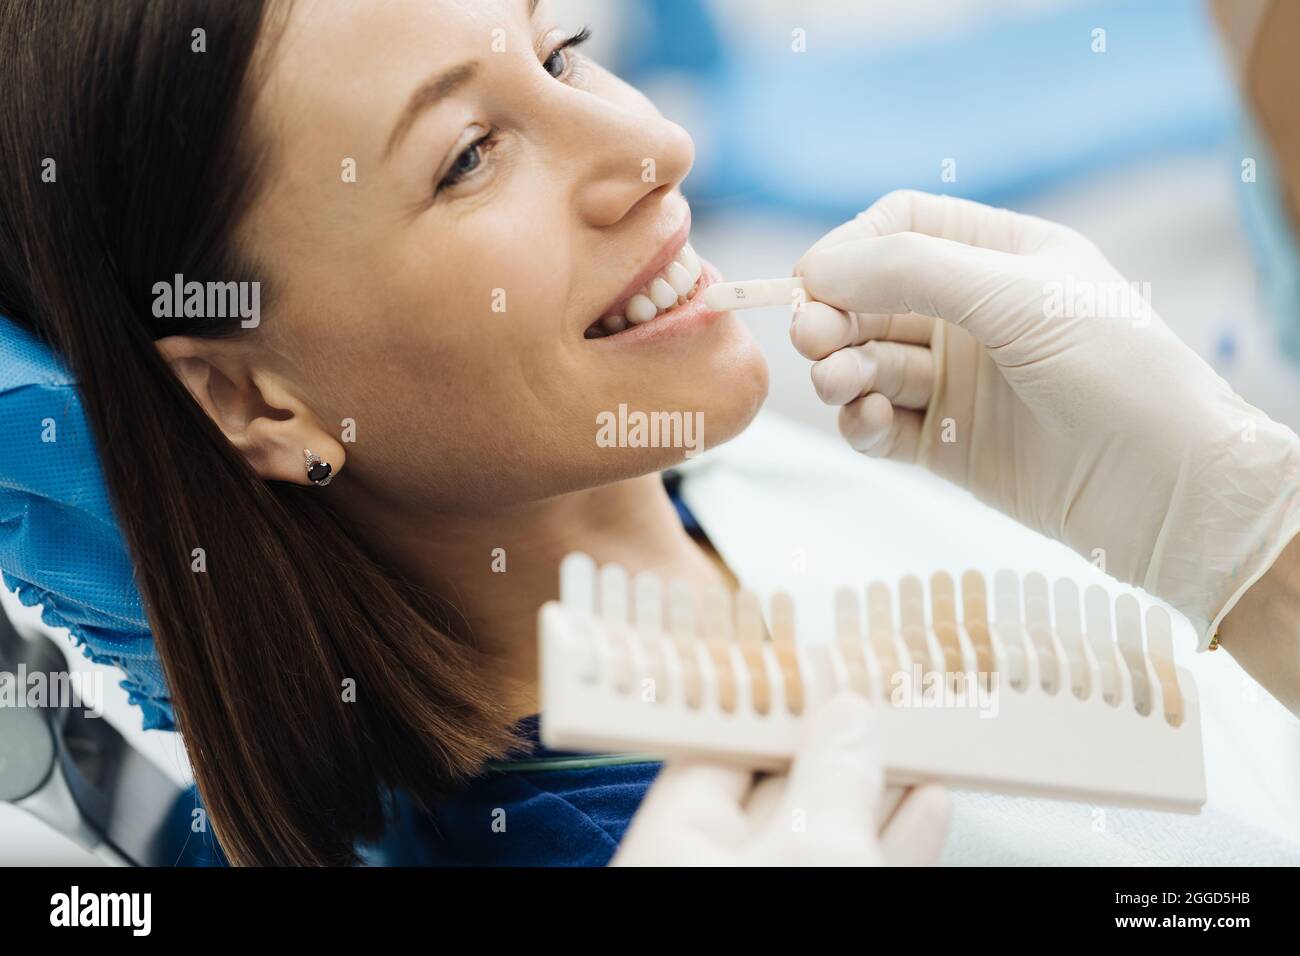 Close up portrait of beautiful young lady sitting in dental chair while stomatologist hands in sterile gloves holding tooth samples. She is smiling Stock Photo